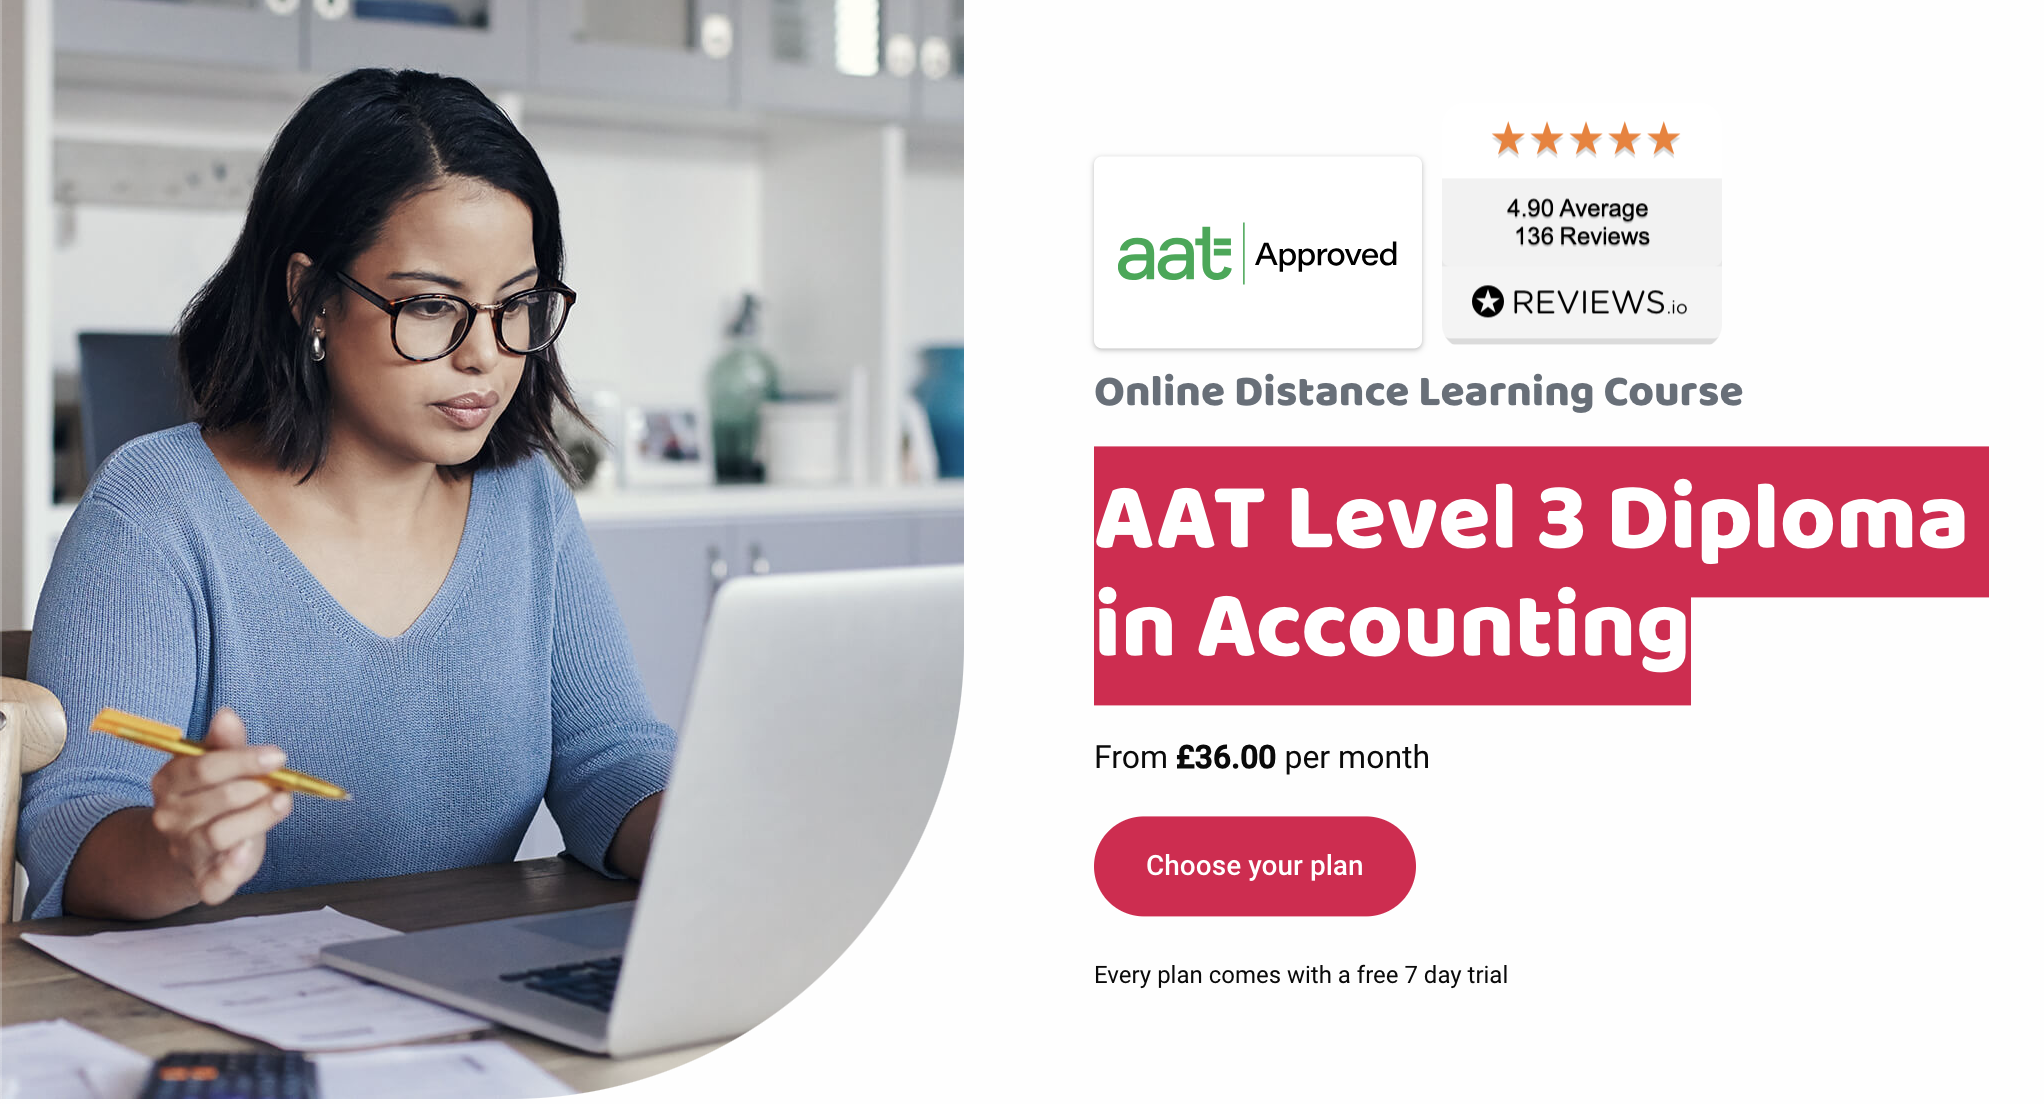 AAT Level 3 Diploma in Accounting